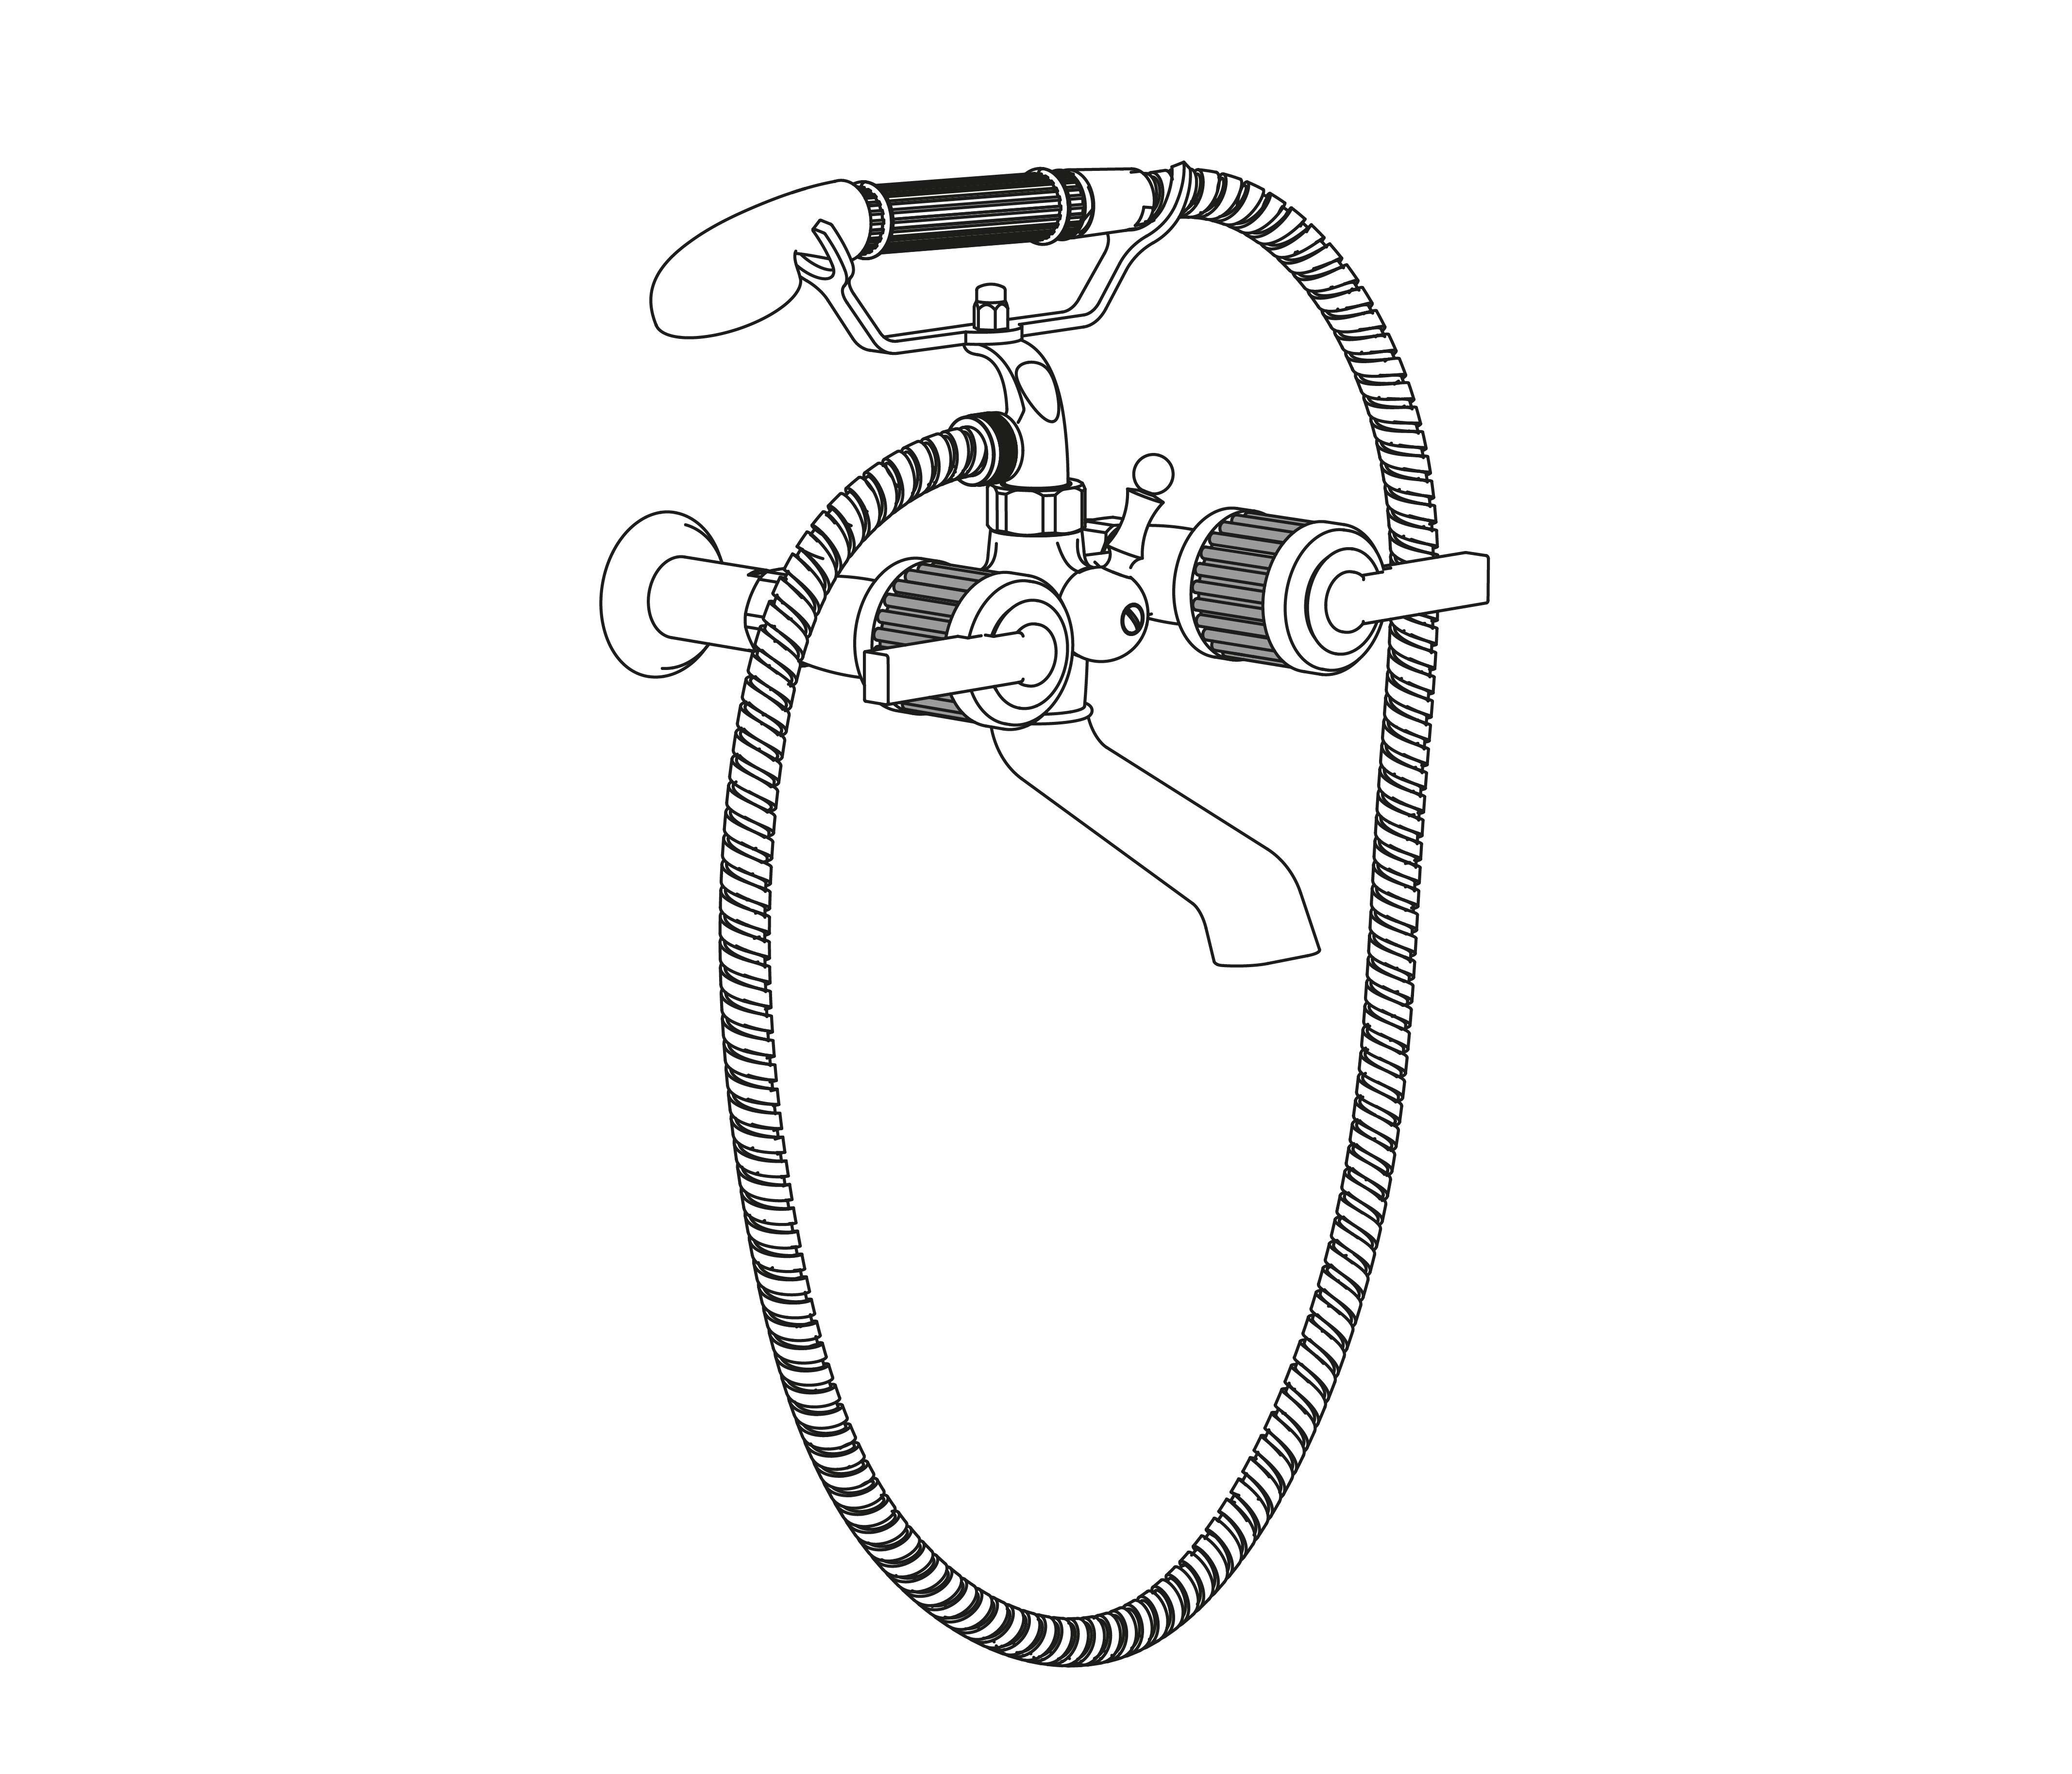 S109-3201 Wall mounted bath and shower mixer